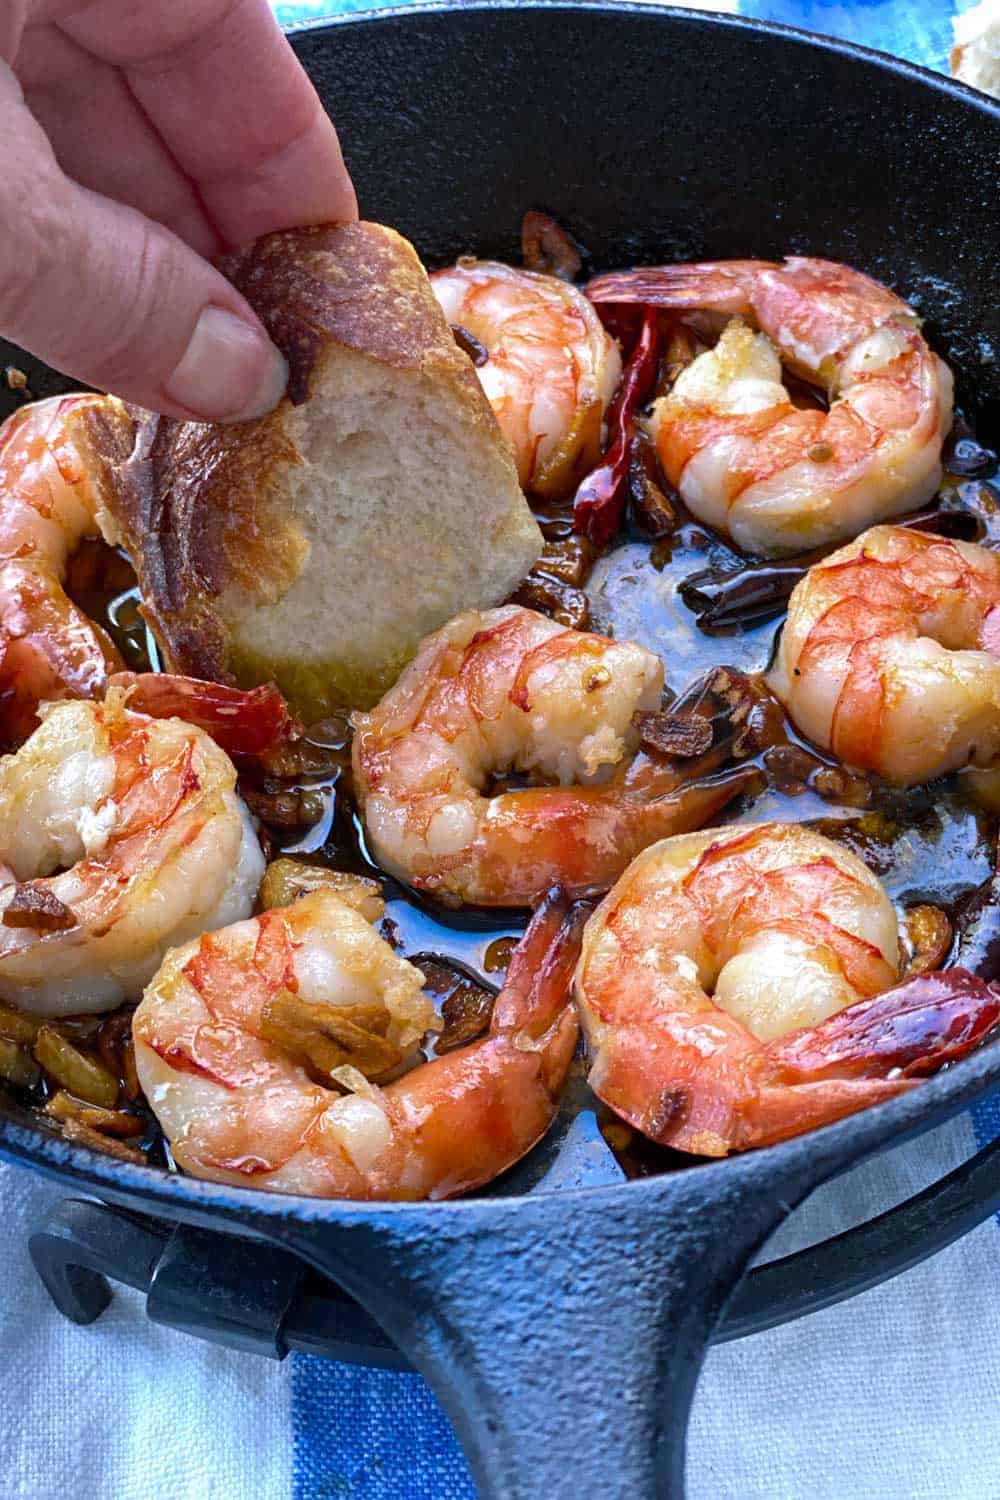 8 shrimp in a skillet with bread being dipped into the garlicky oil